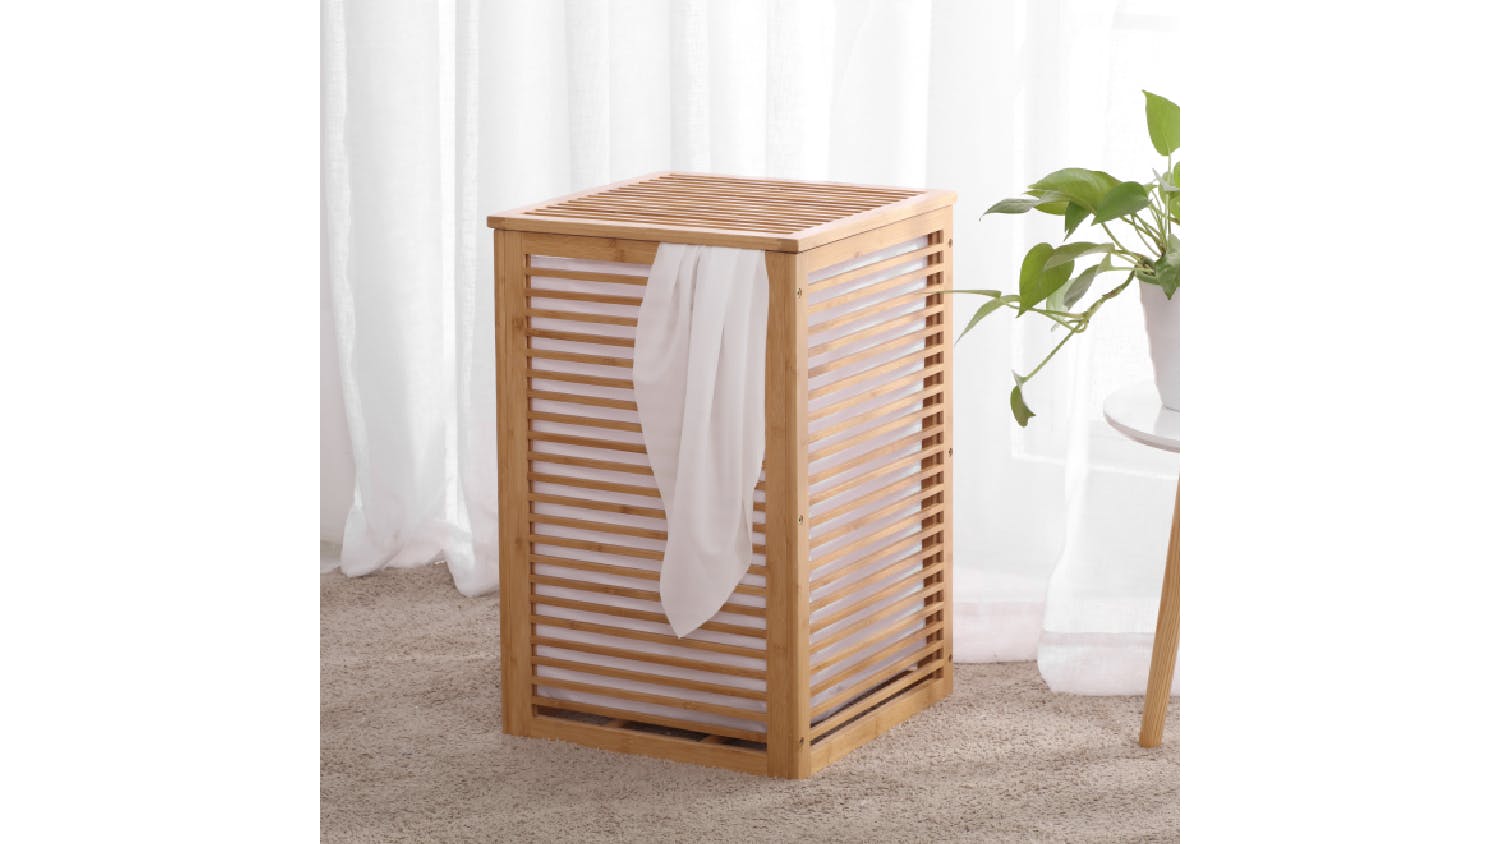 Sherwood Bamboo Slatted Laundry Hamper with Cover - Natural